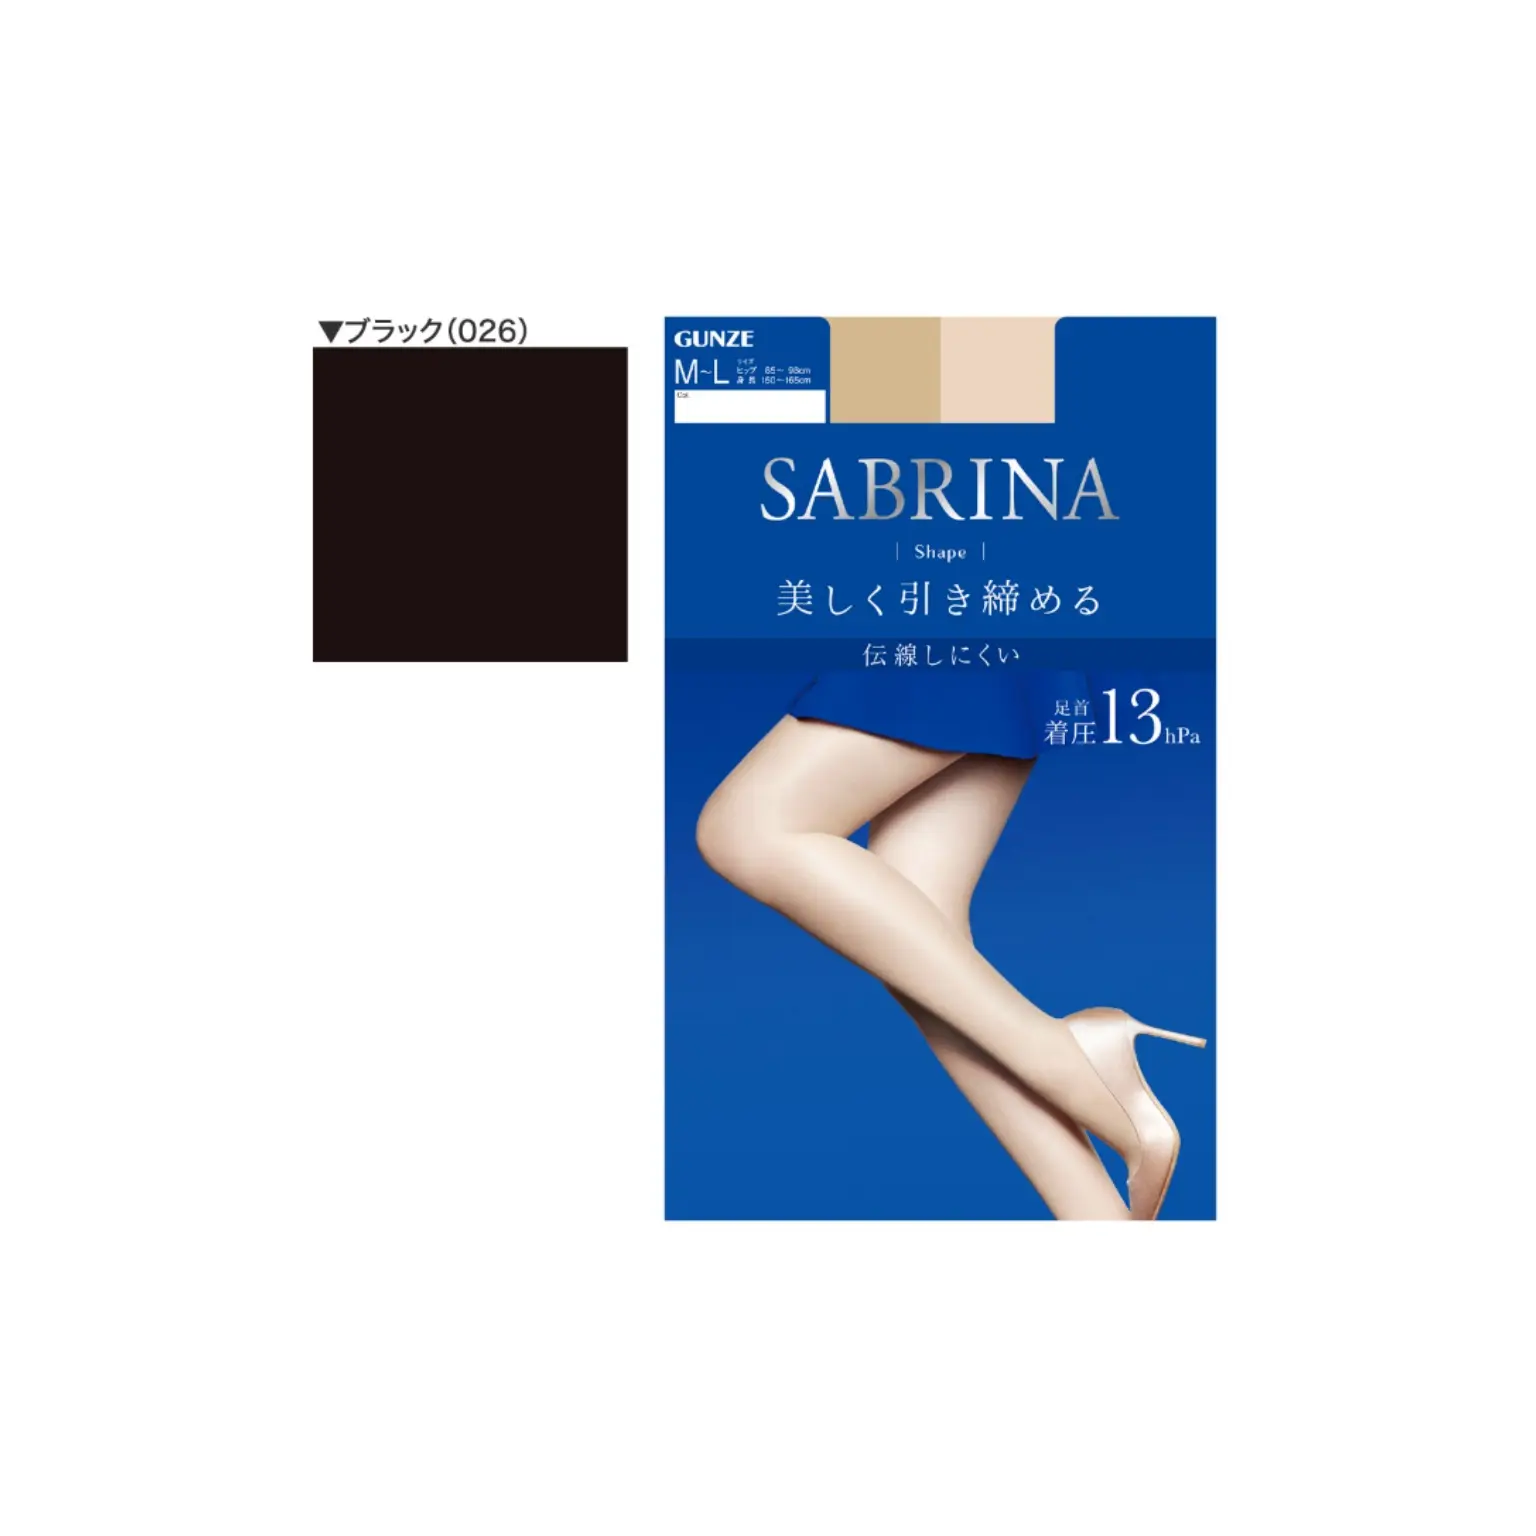 Wide Stretchy Waist Band Thigh High Compression Stockings, SB420